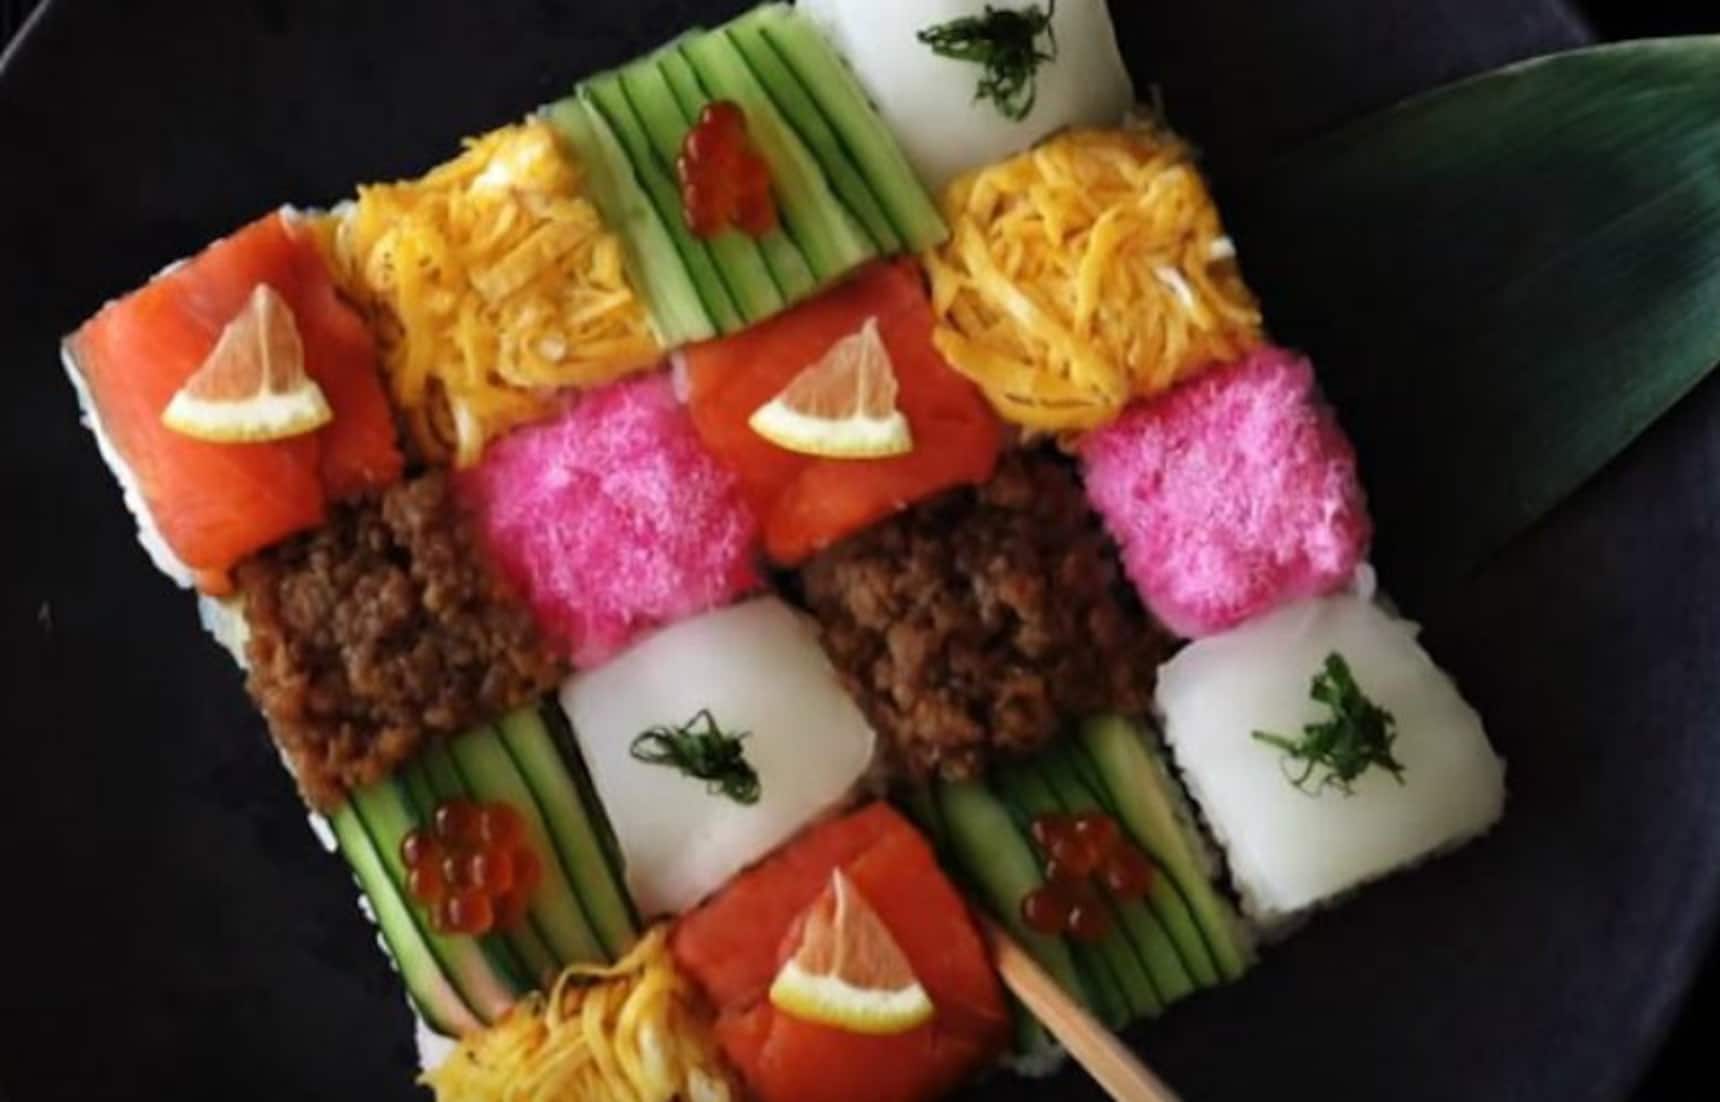 Chow Down on Some Homemade Mosaic Sushi